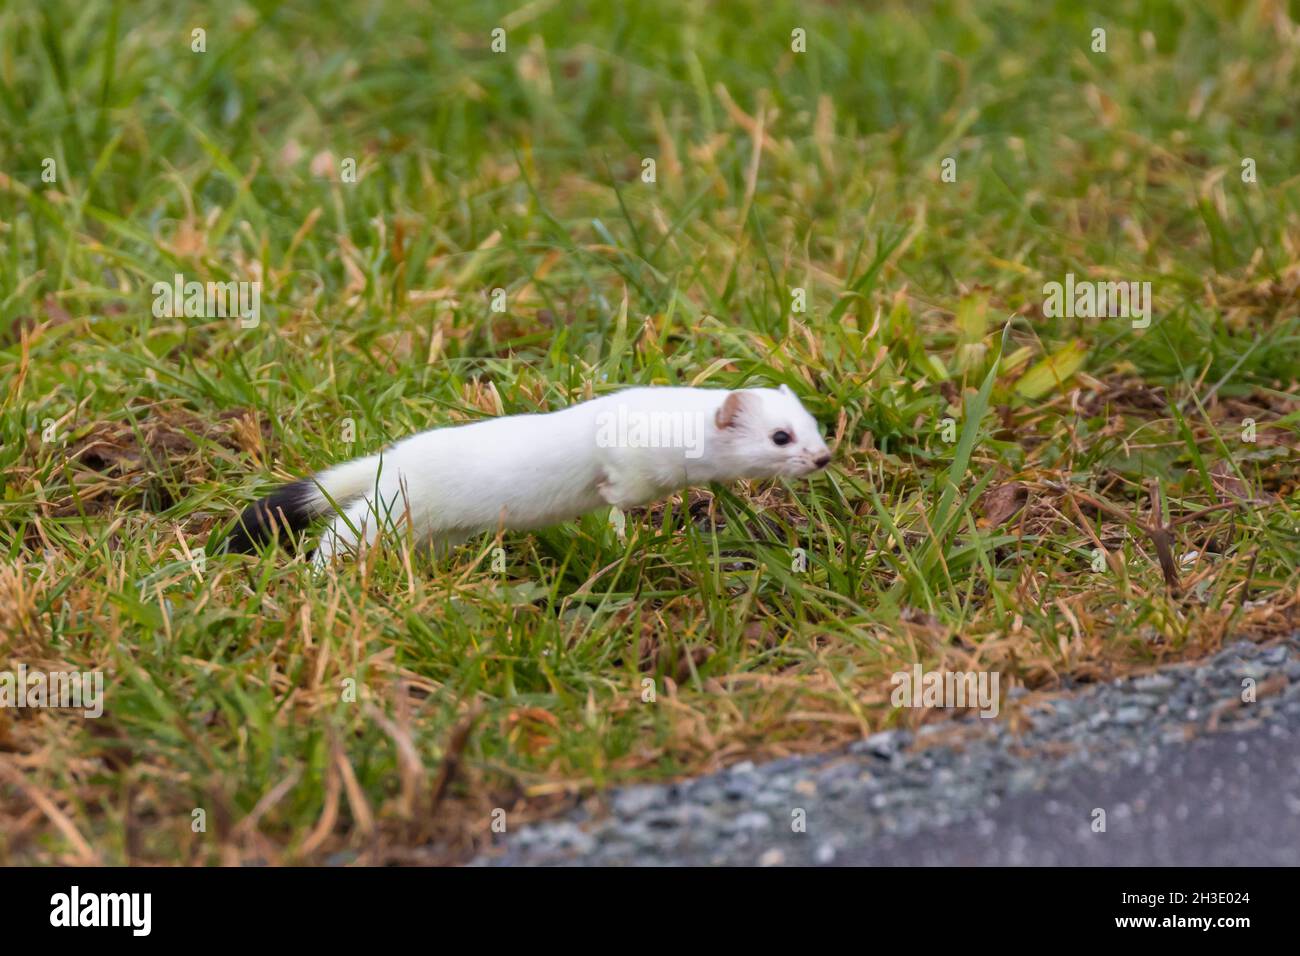 Ermine, Stoat, Short-tailed weasel (Mustela erminea), in winter fur, jumping out of the grass onto a street , Germany Stock Photo